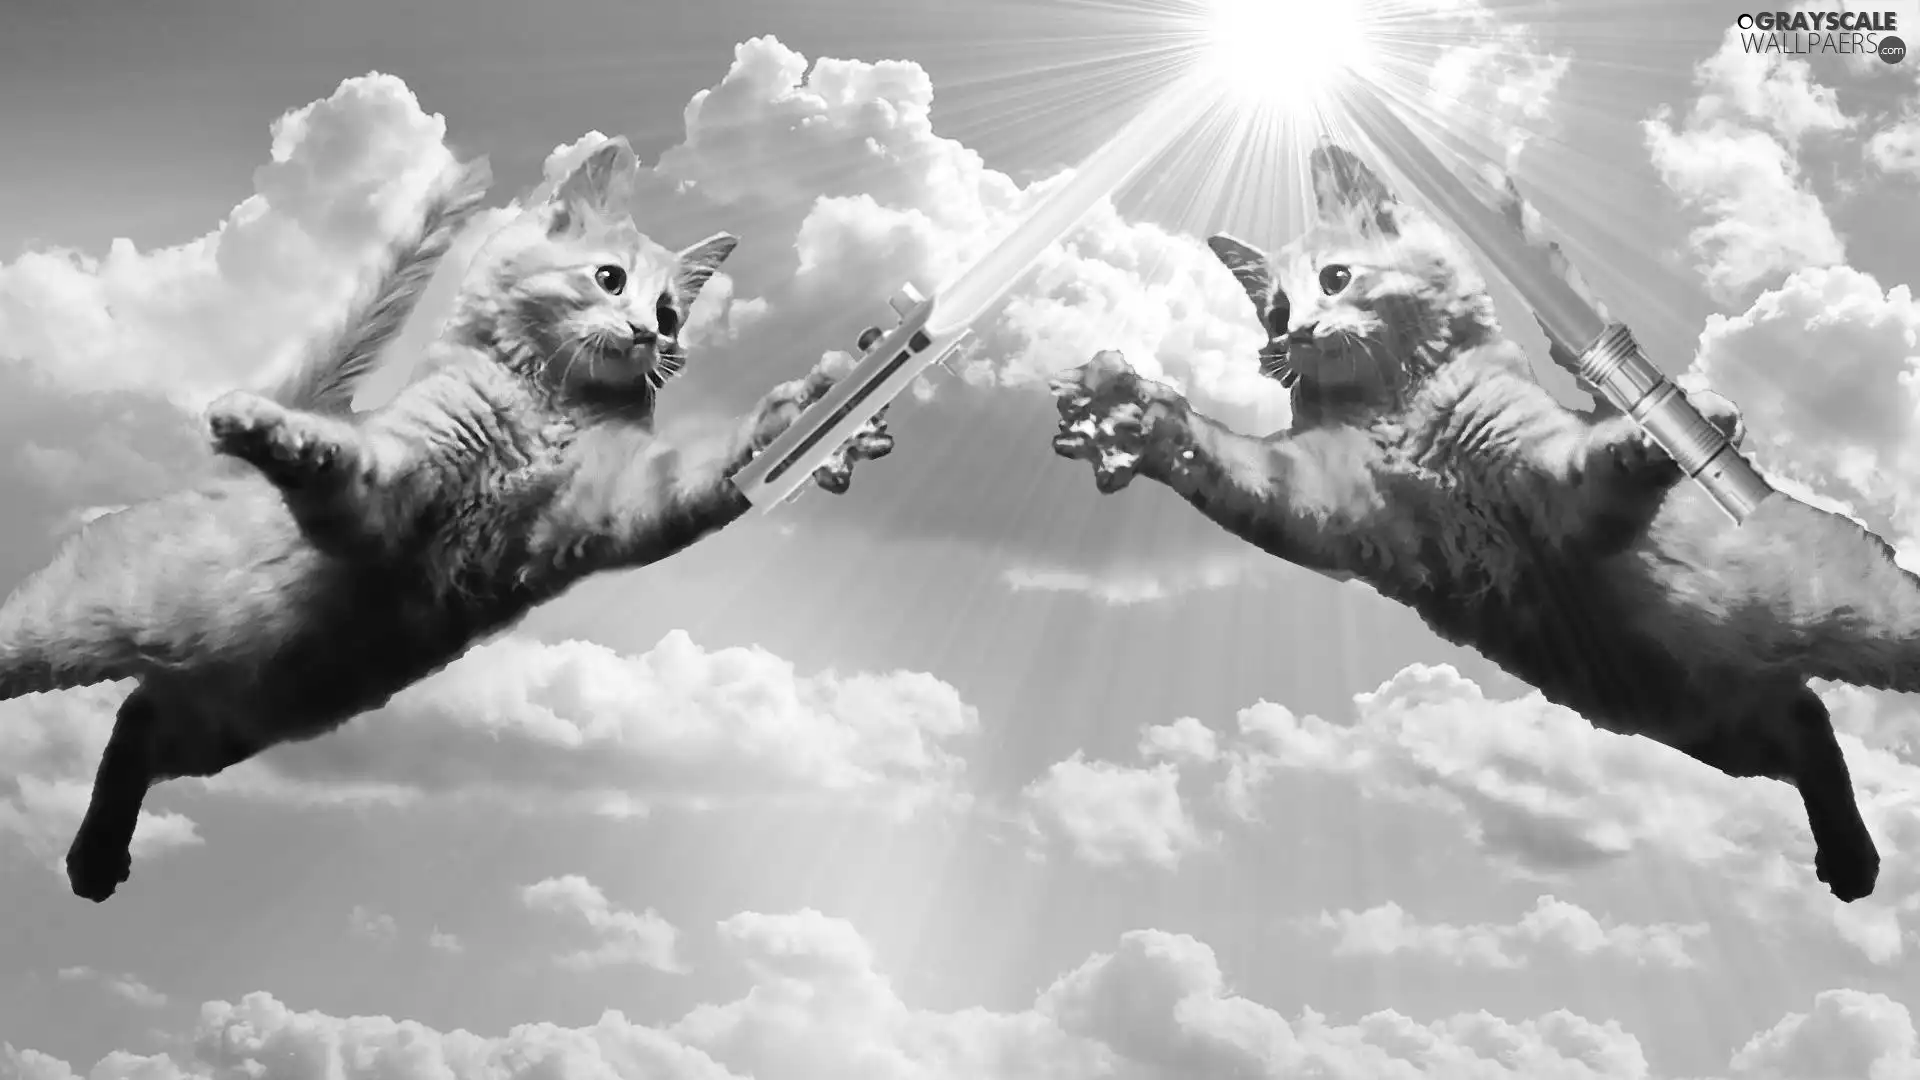 Two cars, Swords, clouds, cats